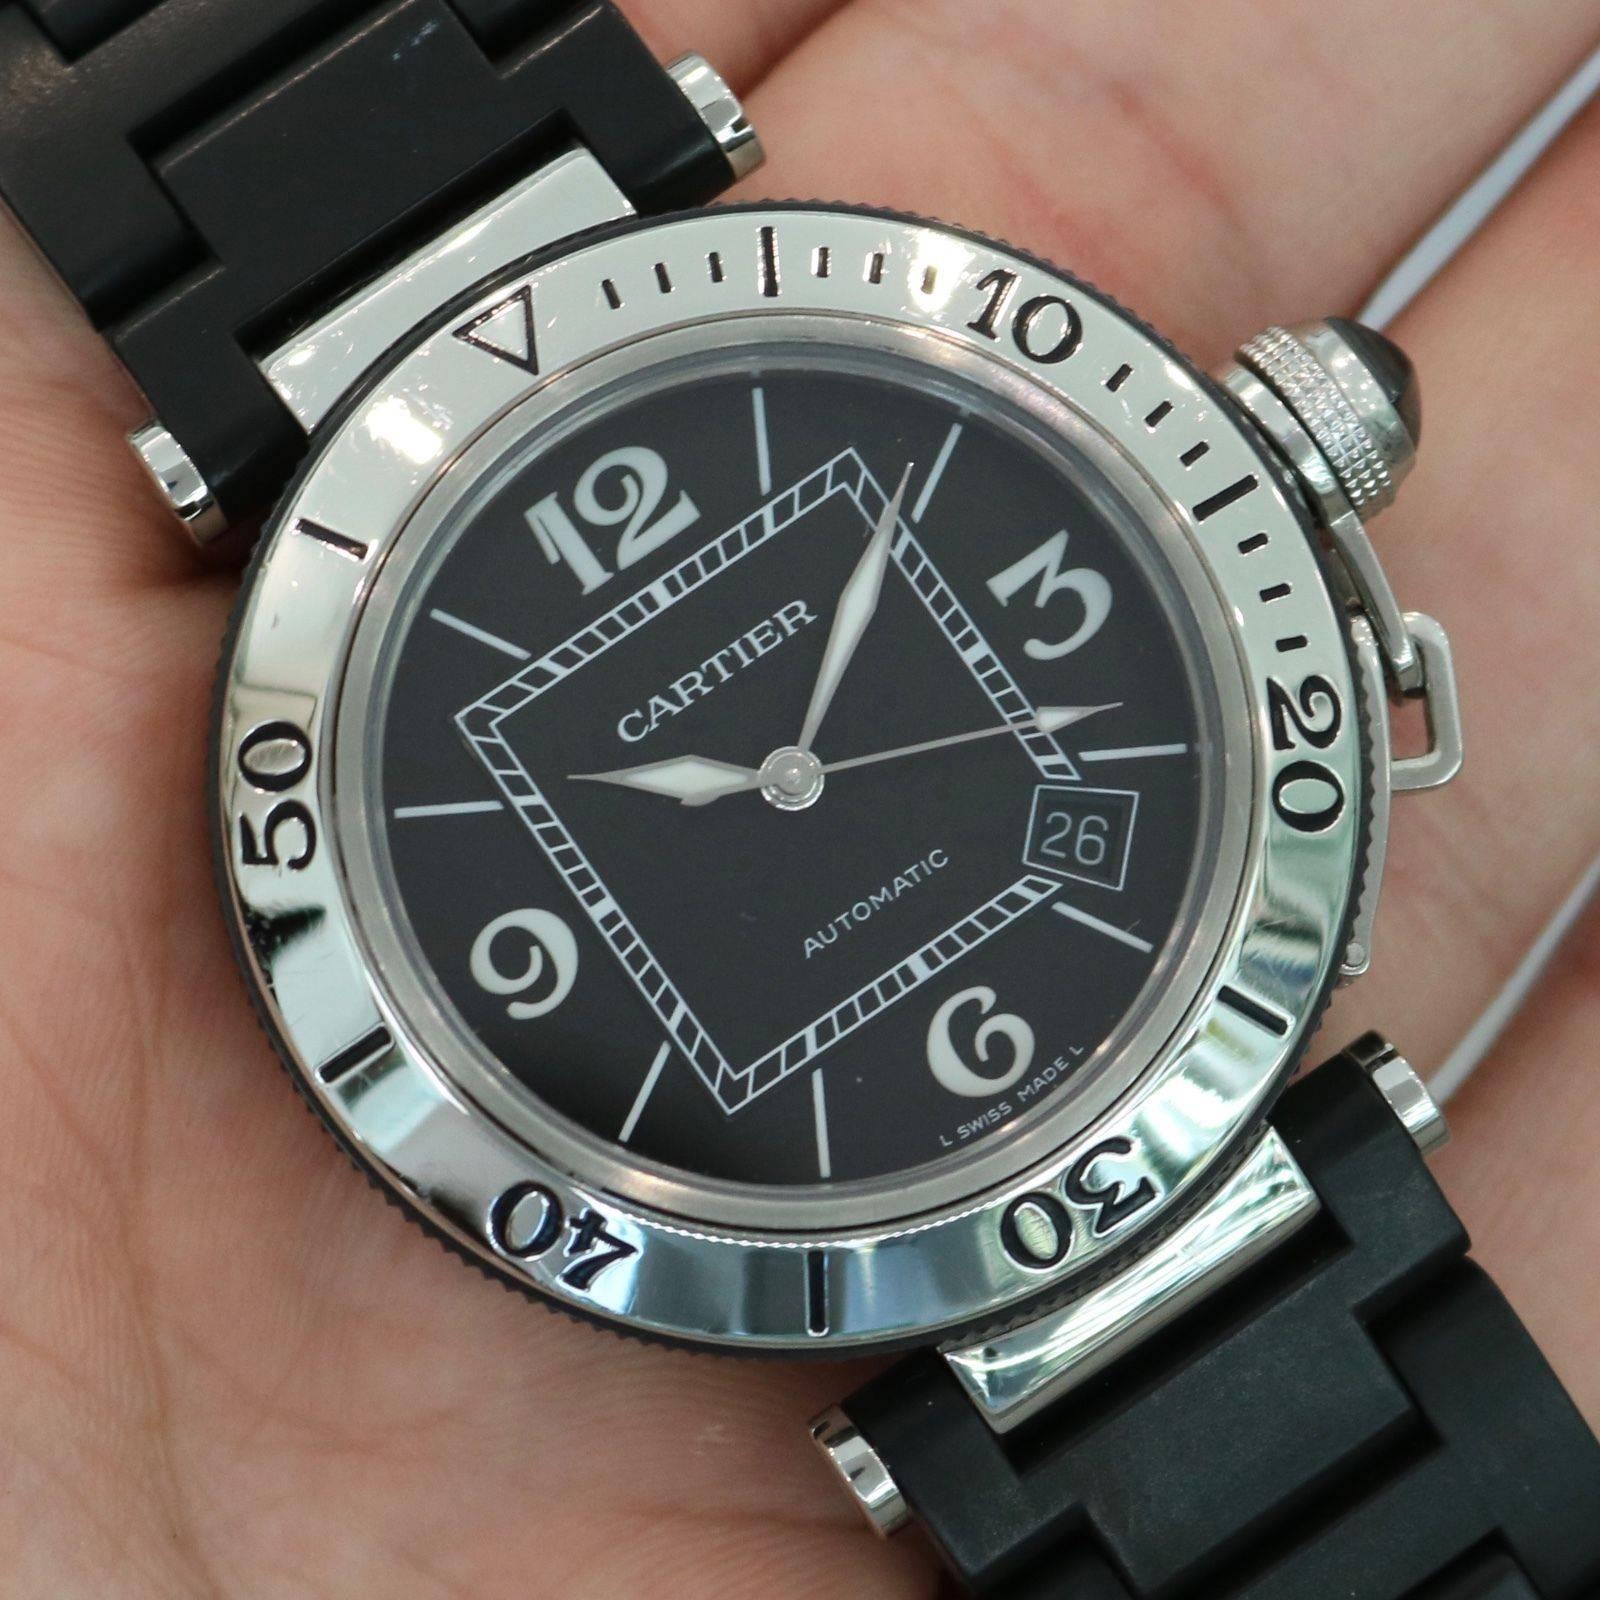 Brand Name:  Cartier
Style Number:  W31077U2
Series:  Pasha Seatimer
Gender:  Men's
Case Material:  Stainless Steel
Dial Color:  Black
Movement:  Automatic
Functions:  Hours, Minutes, Seconds, Date
Crystal Material:  Sapphire
Case Diameter: 